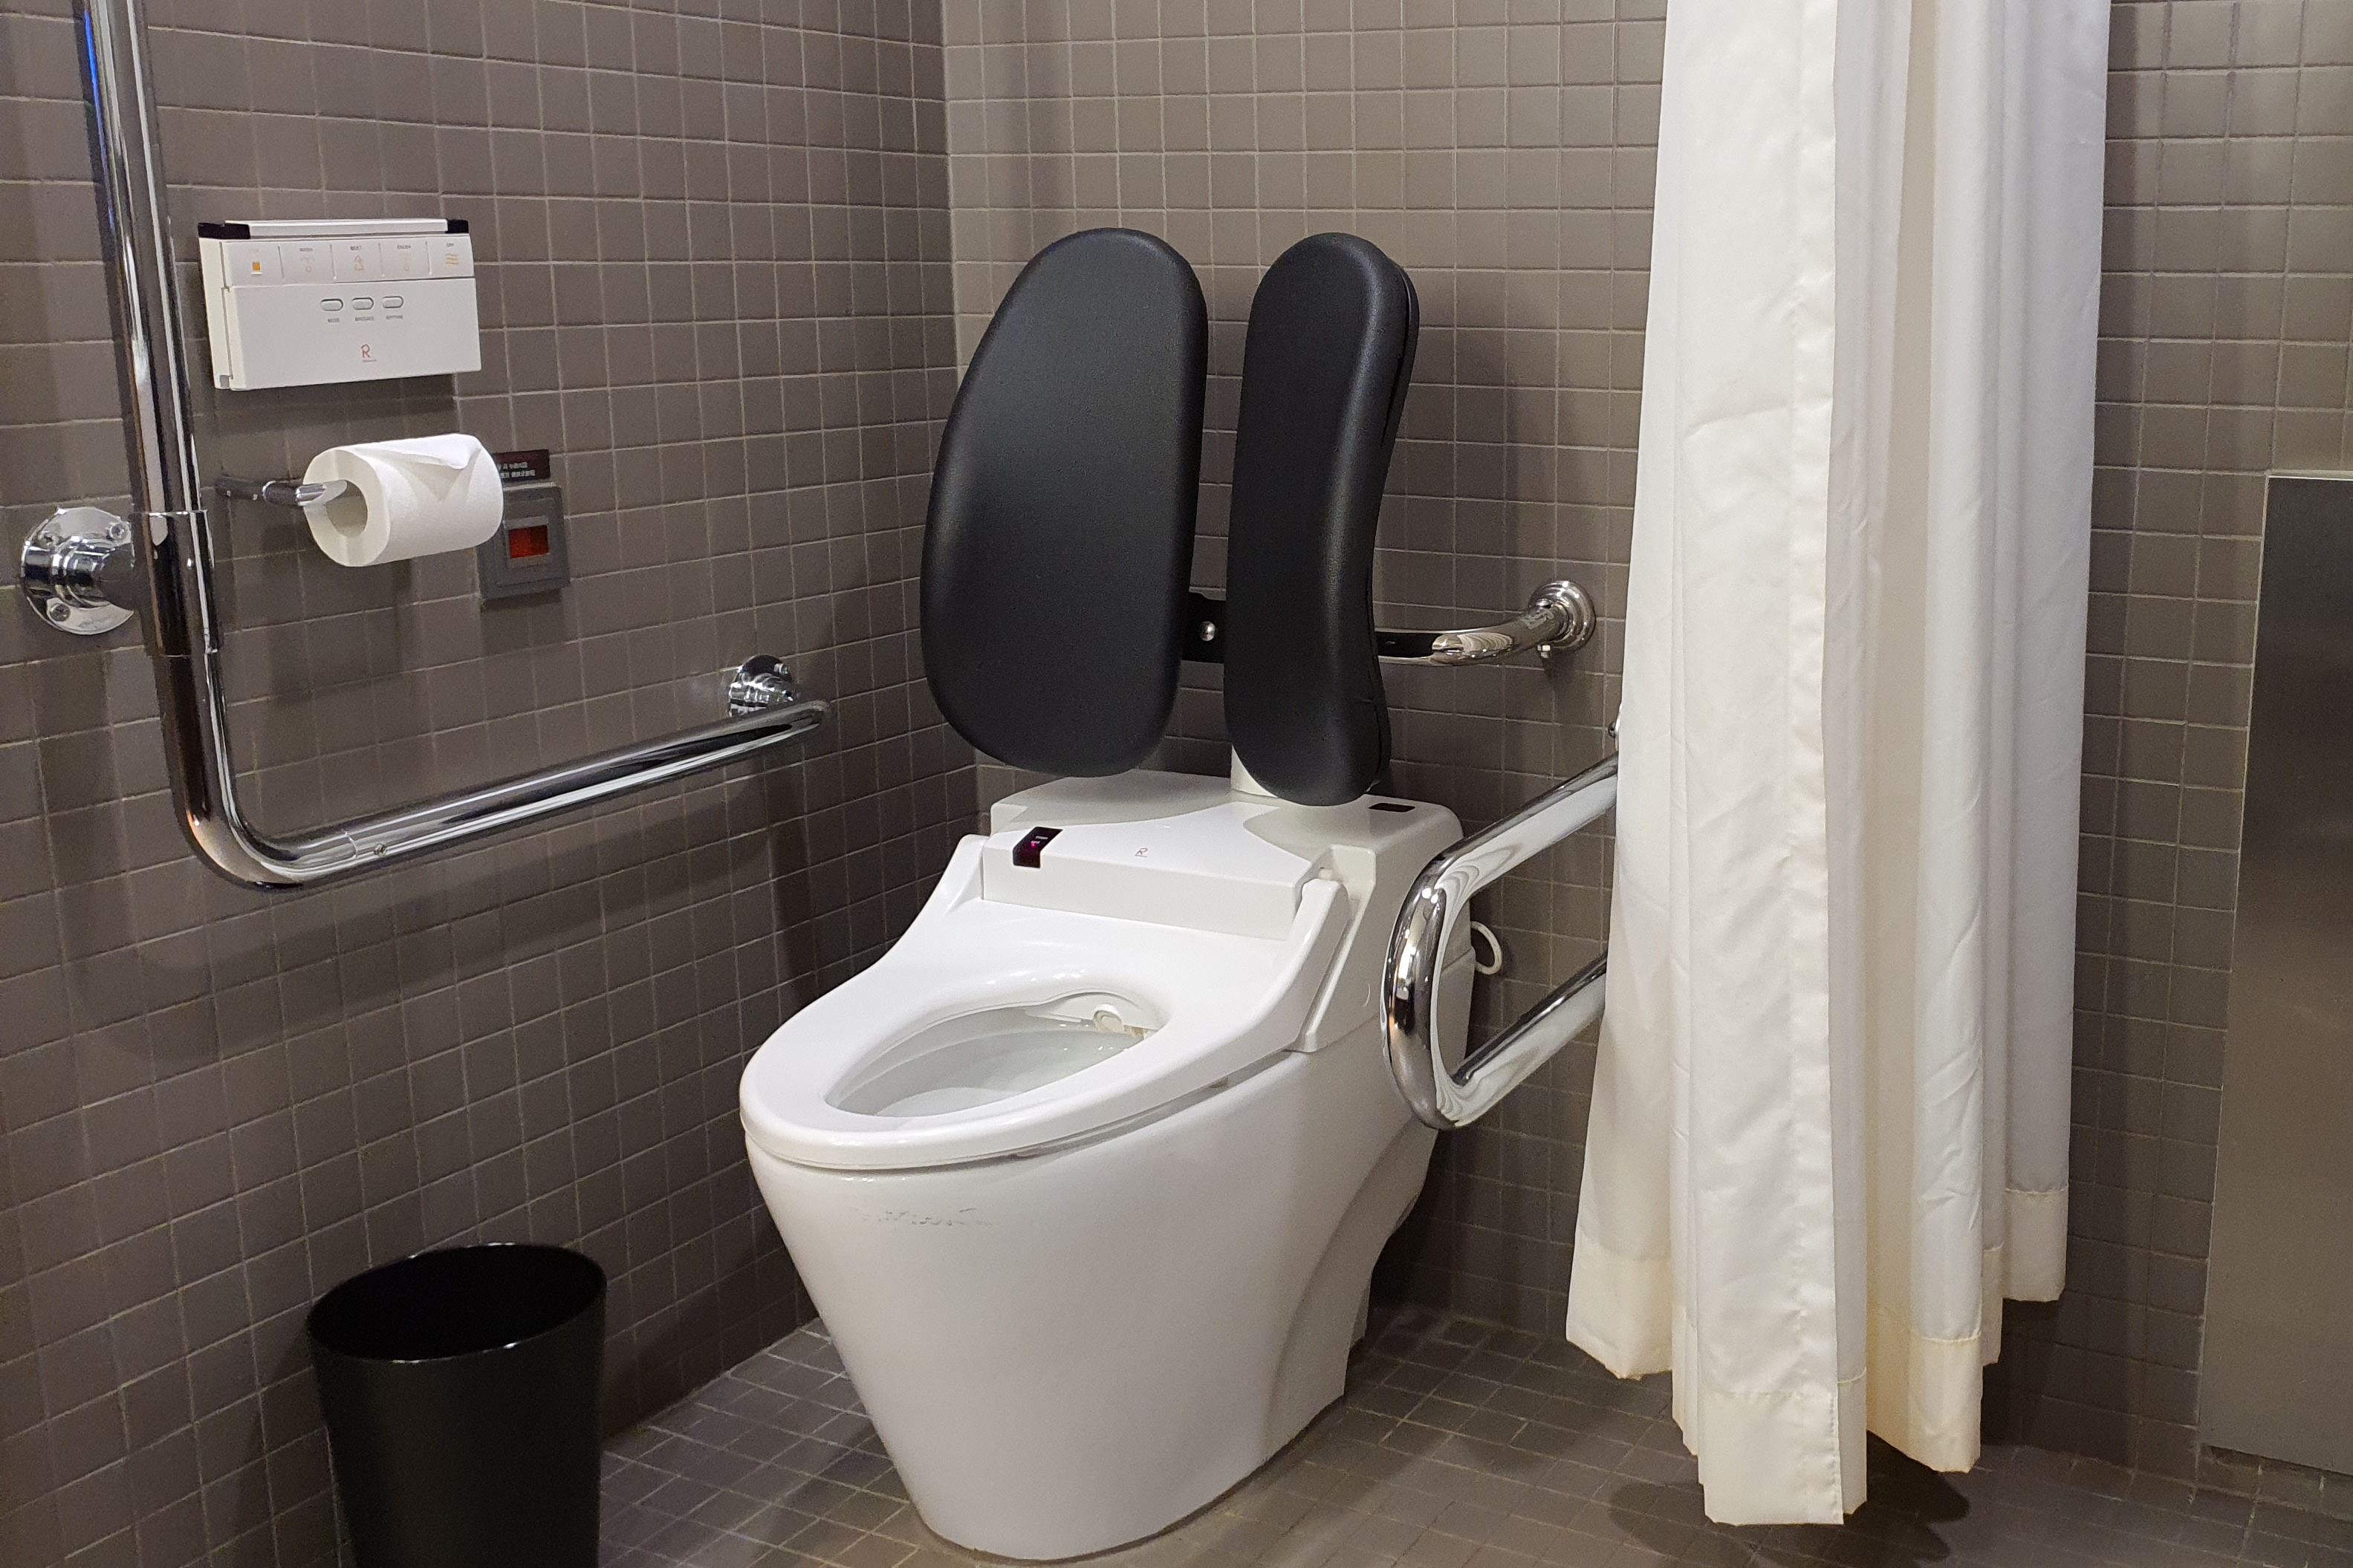 Bathroom in the guestroom 0 : A toilet equipped with grab bars in the separated area by a curtain